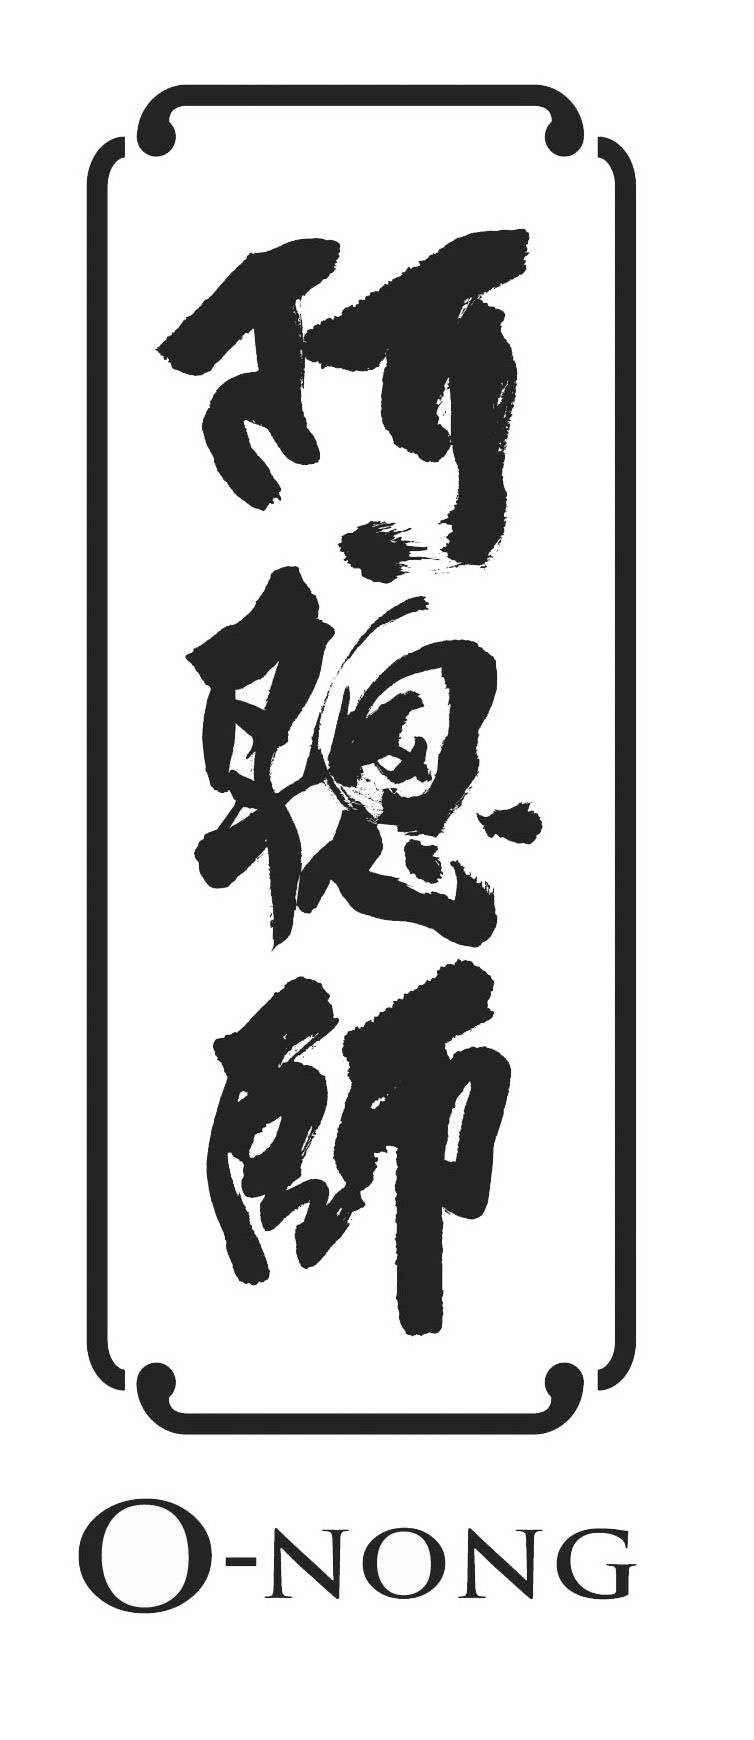  THREE CHINESE CHARACTERS SURROUNDED BY A RECTANGULAR BORDER ABOVE THE WORD O-NONG